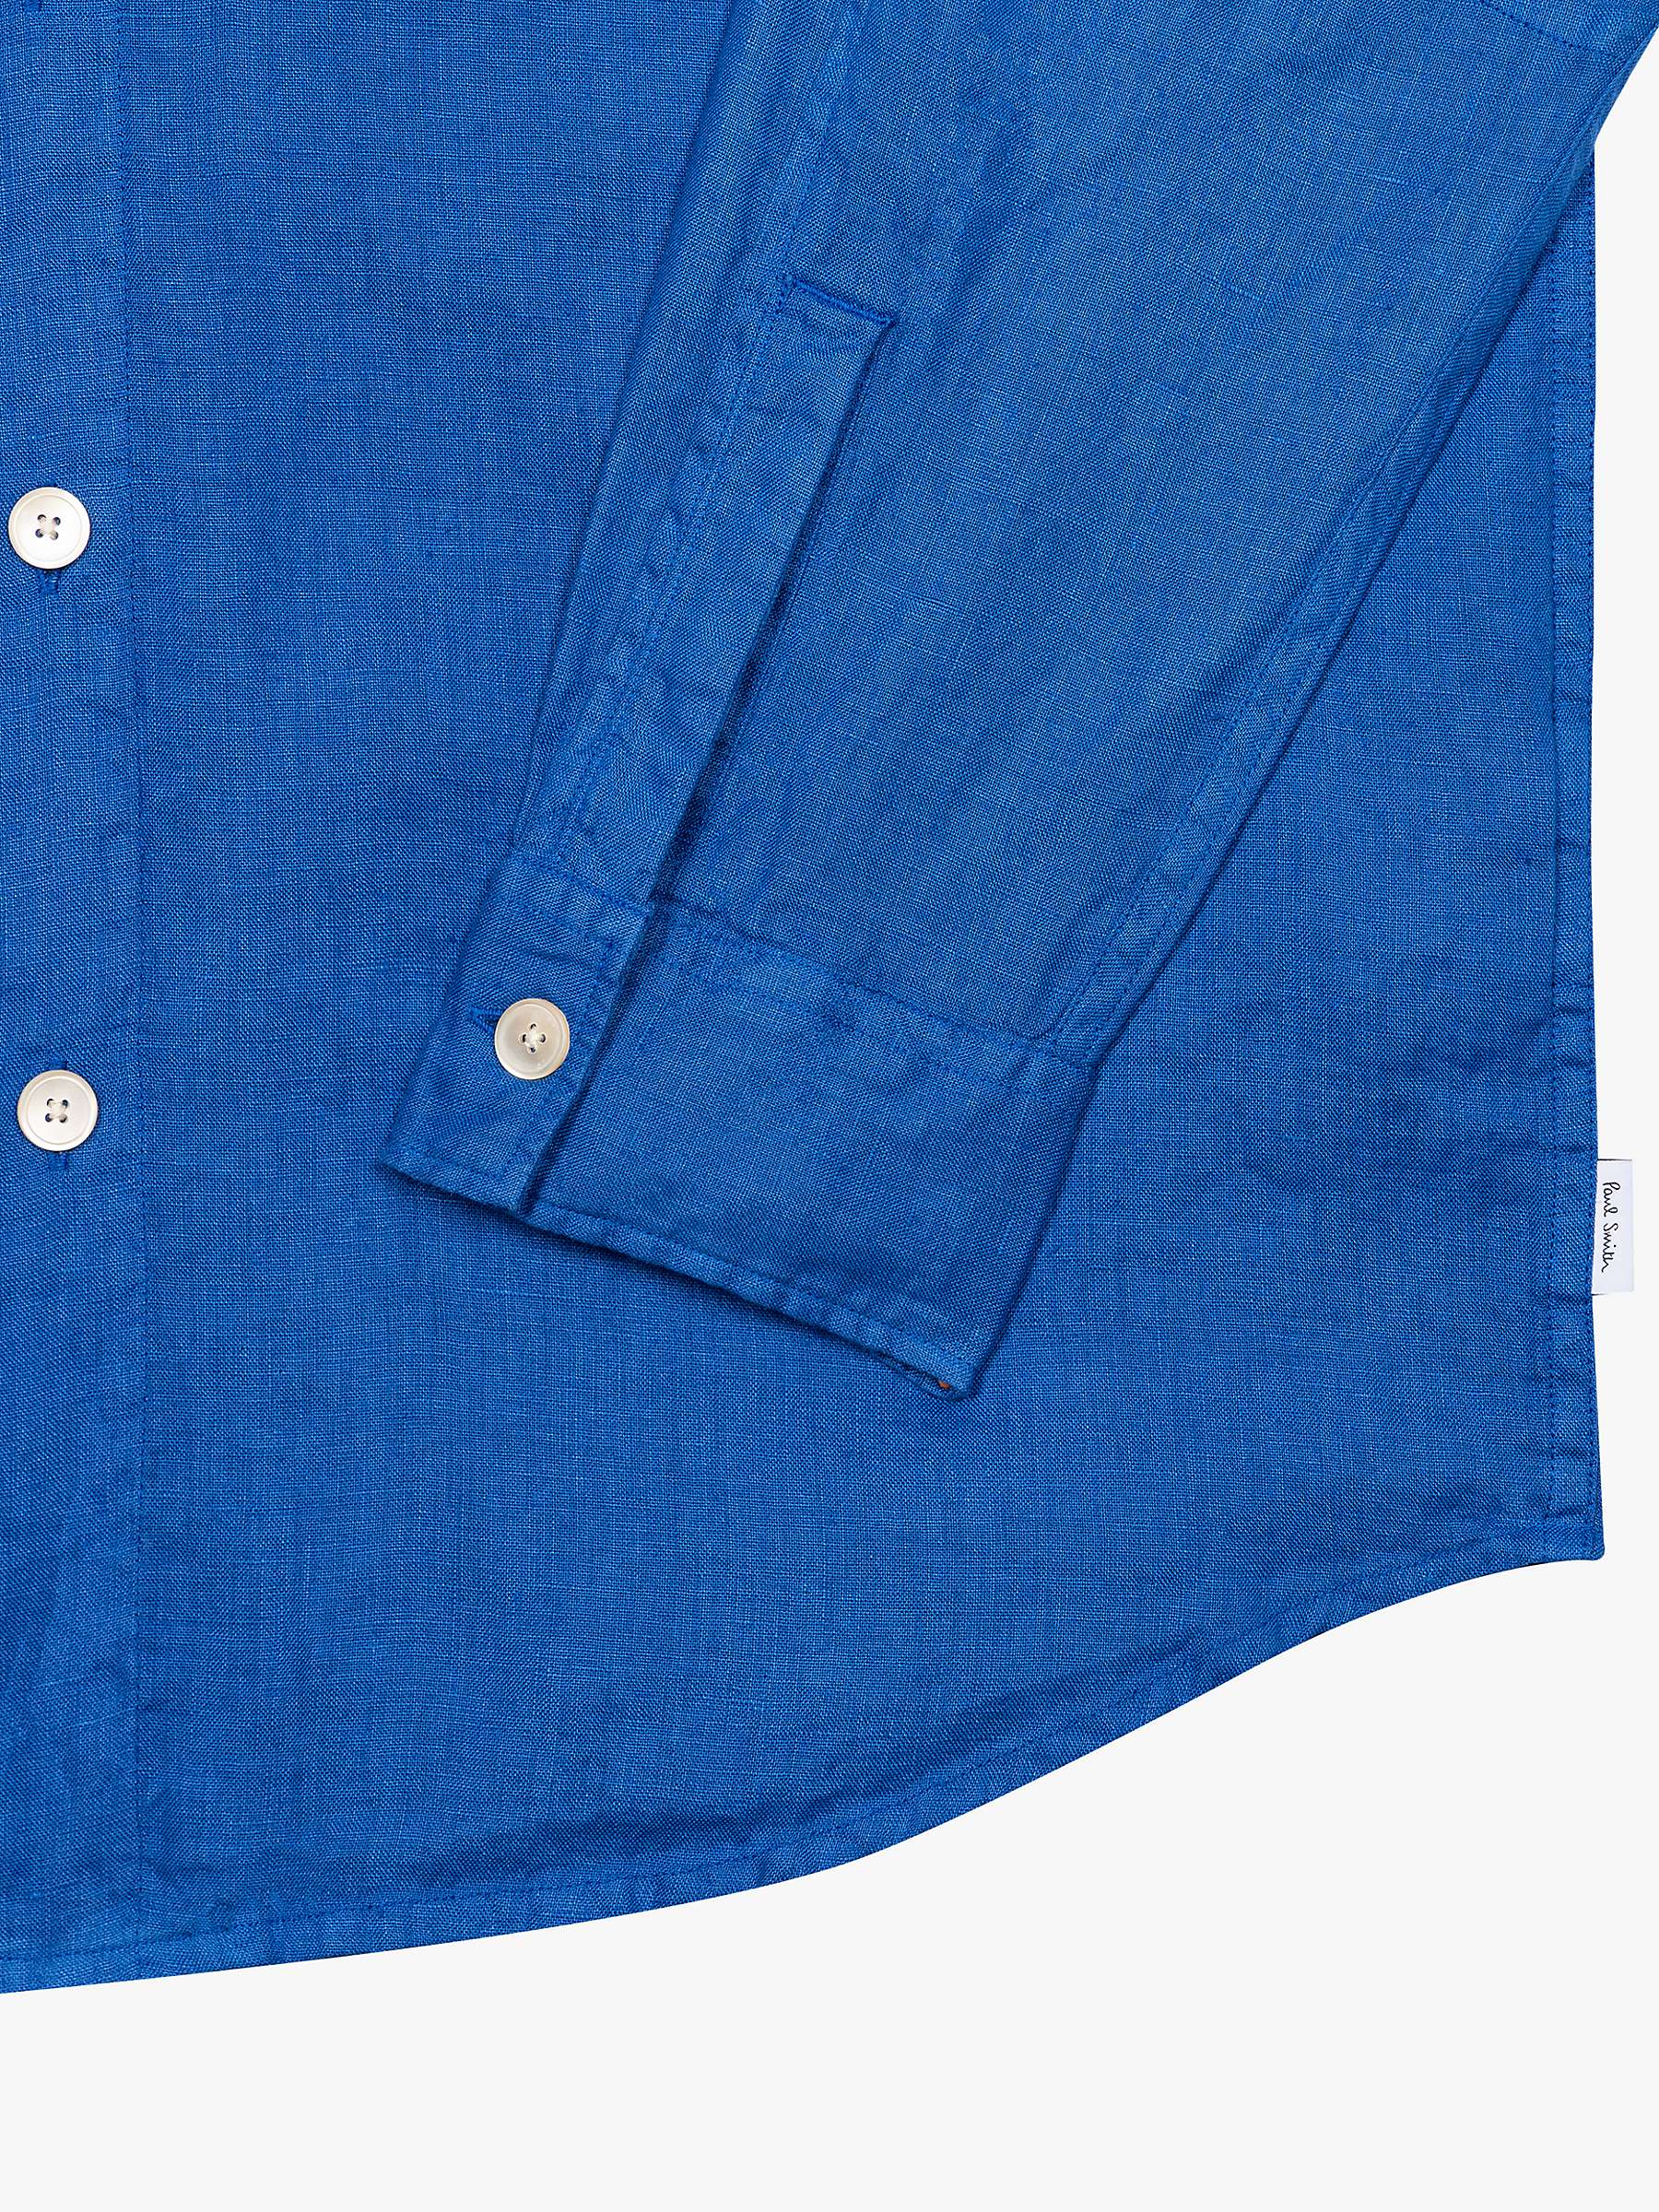 Buy Paul Smith Long Sleeve Casual Fit Shirt, Blue Online at johnlewis.com